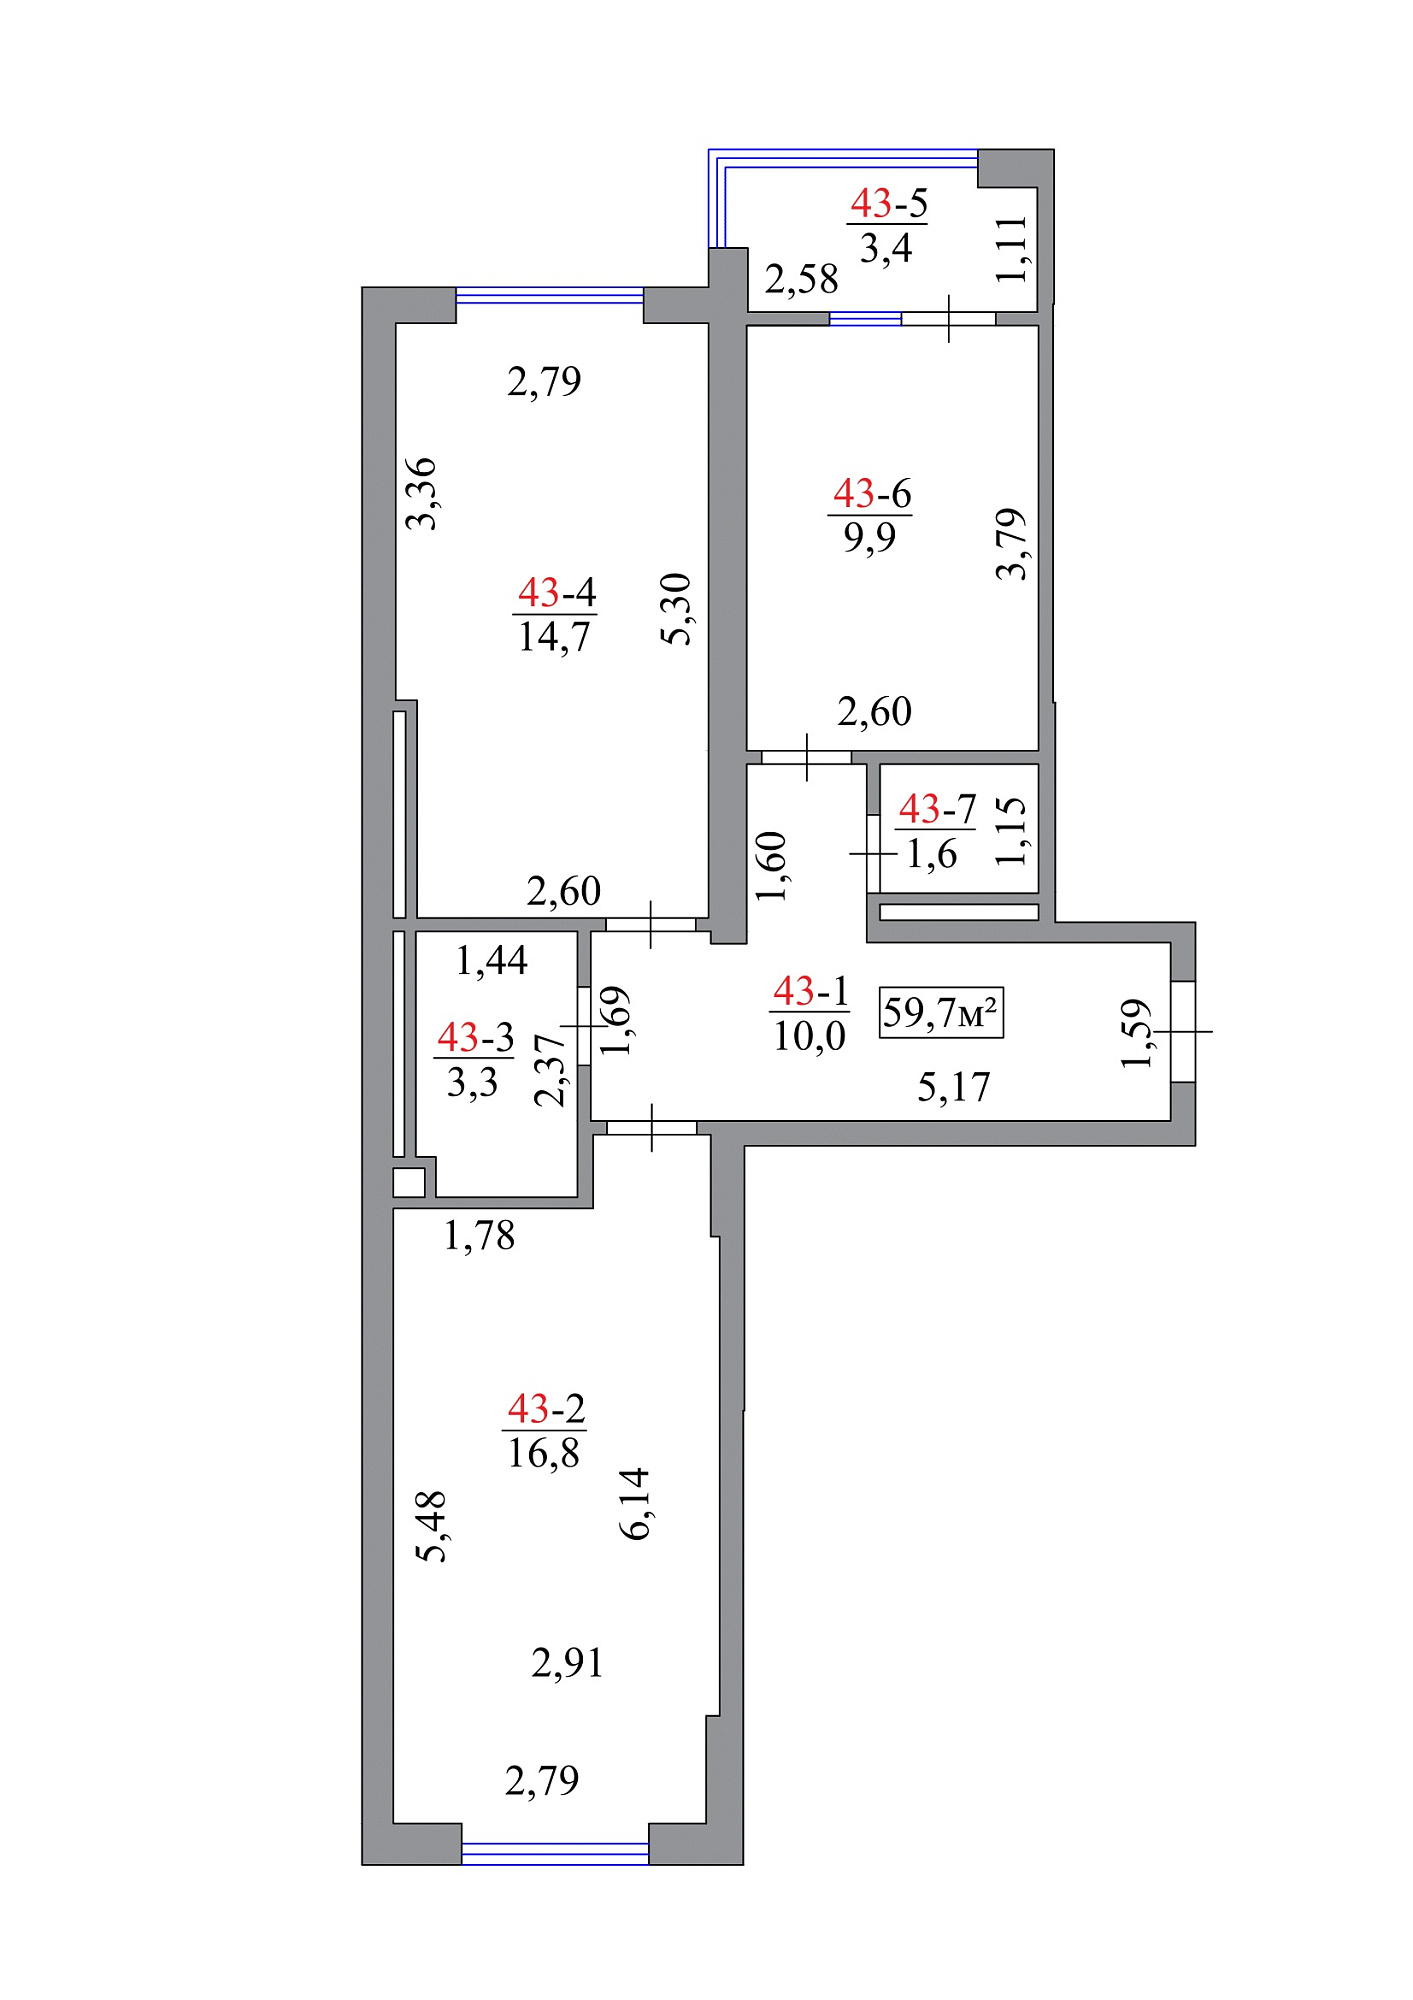 Planning 2-rm flats area 59.7m2, AB-07-05/00039.